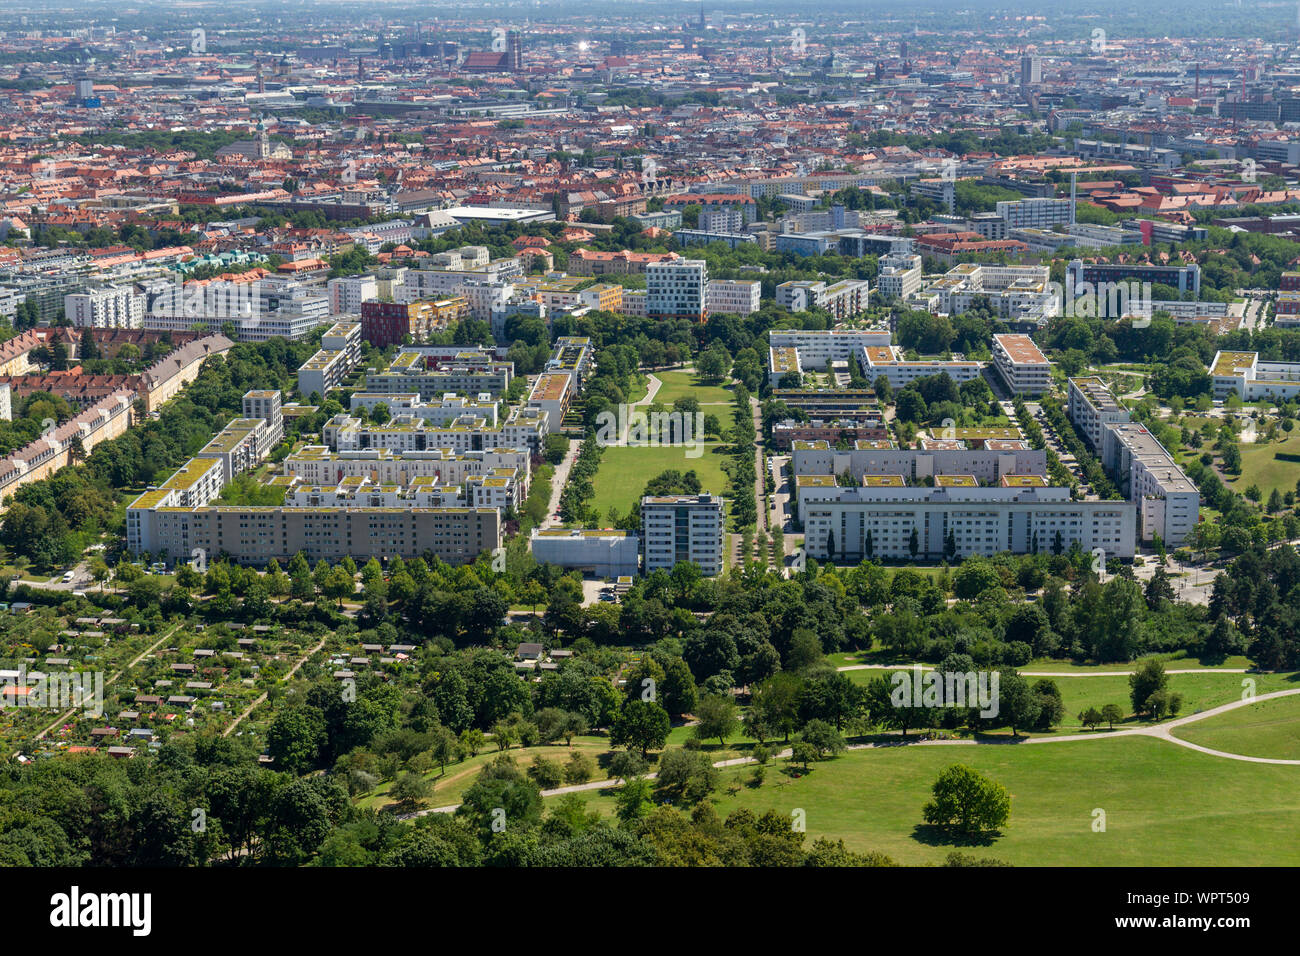 View of the housing and park area south of the Olympiaturm (Olympic Tower), Munich, Bavaria, Germany. Stock Photo